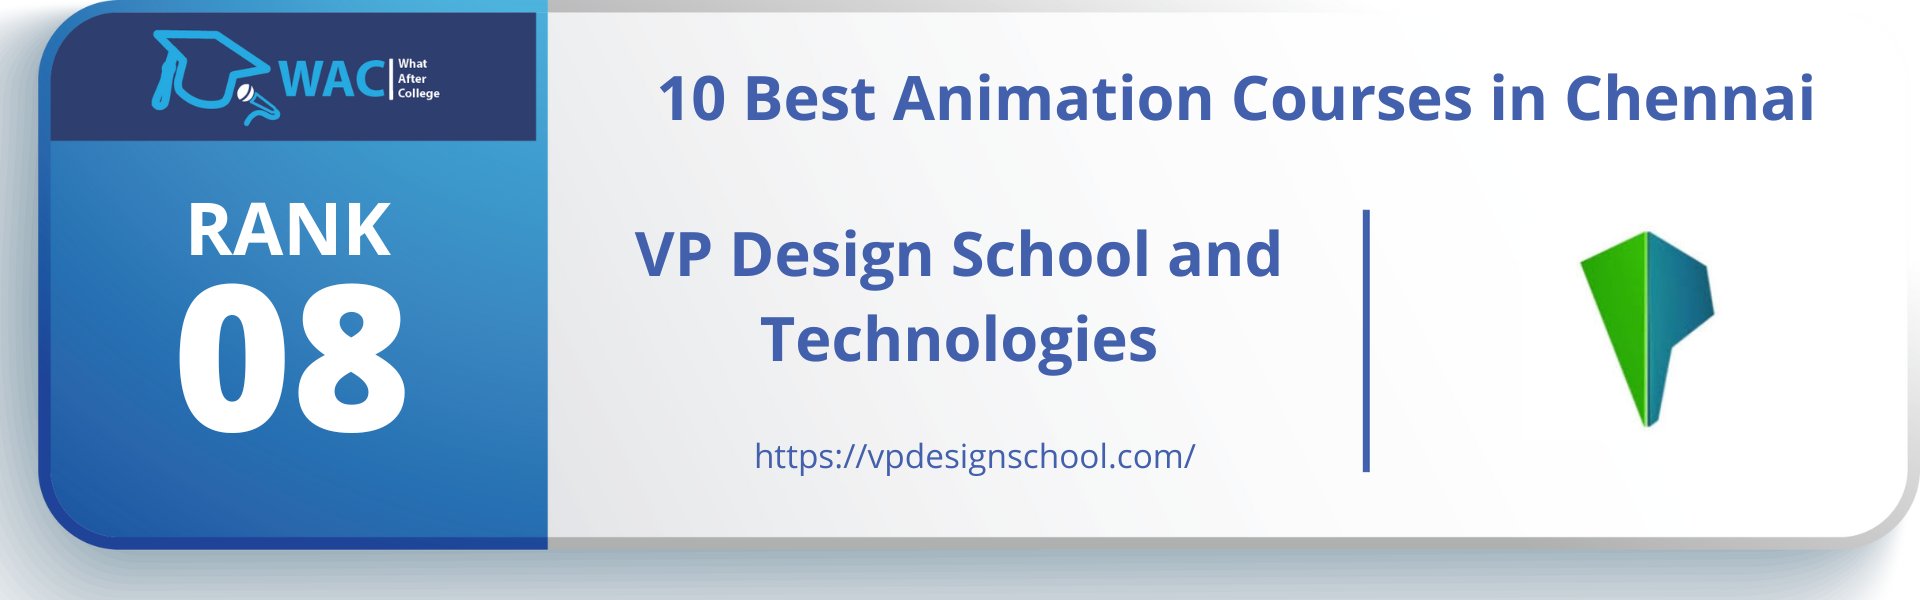 10-Best-Animation-Courses-in-Chennai-Rank-8_-VP-Design-School-and-Technologies  | What After College